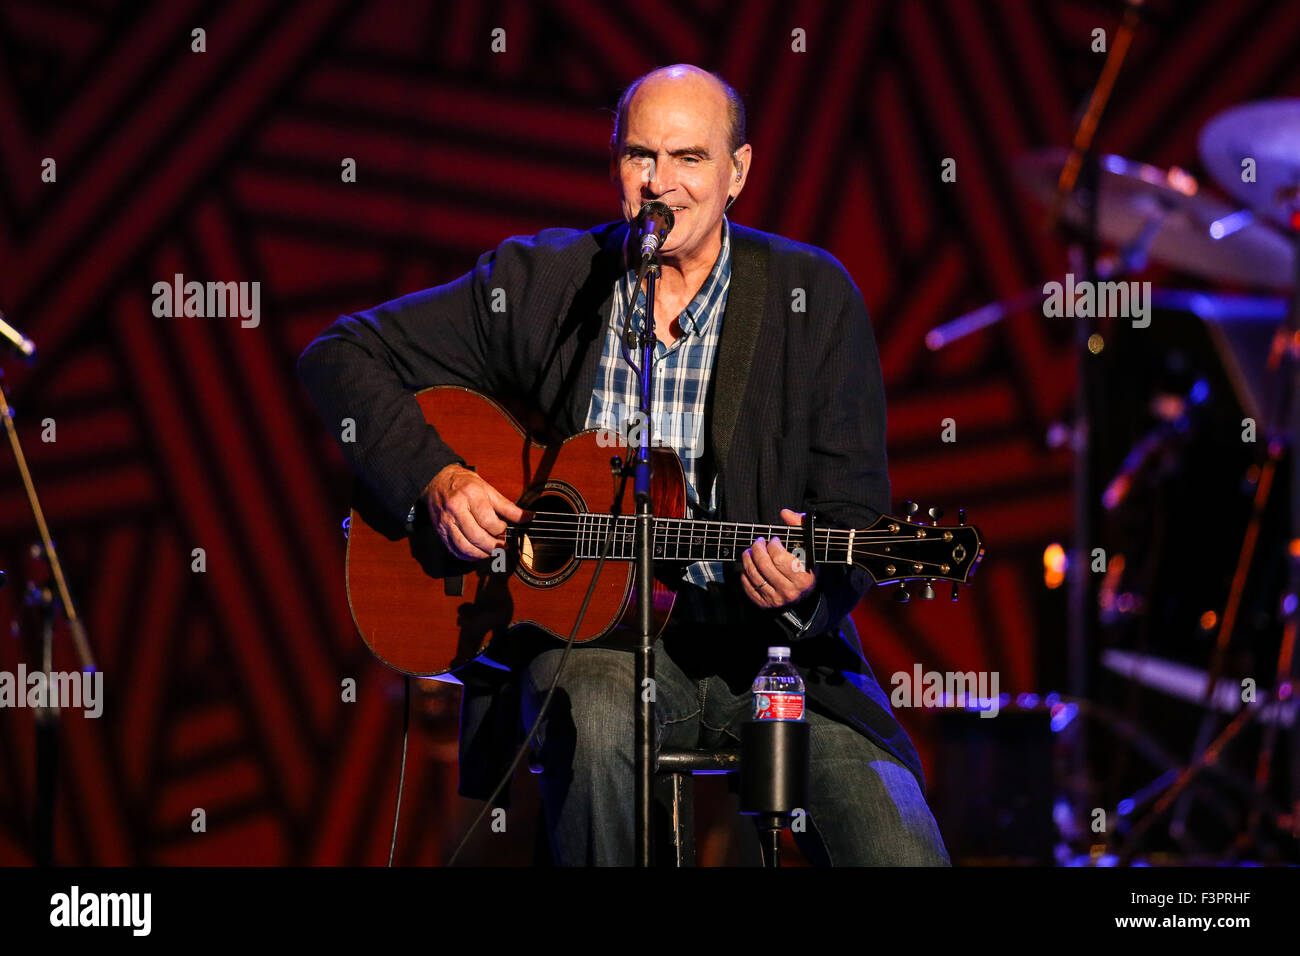 James Taylor performs live in concert 2015 Stock Photo